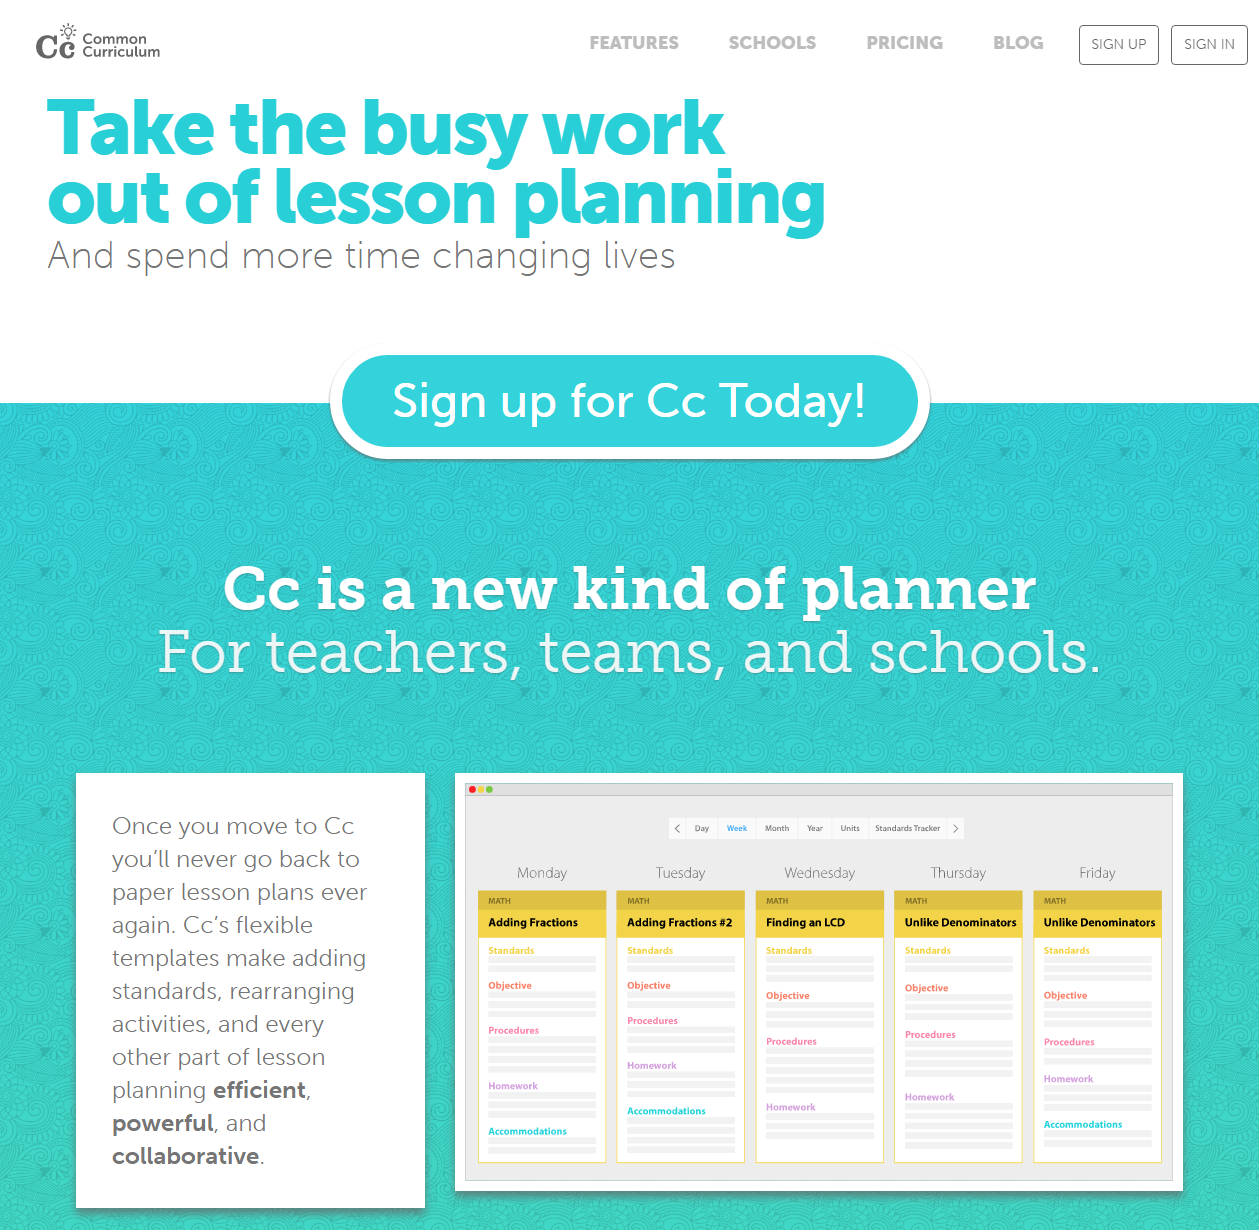 Free lesson planner and planbook for teachers, commoncurriculum.com